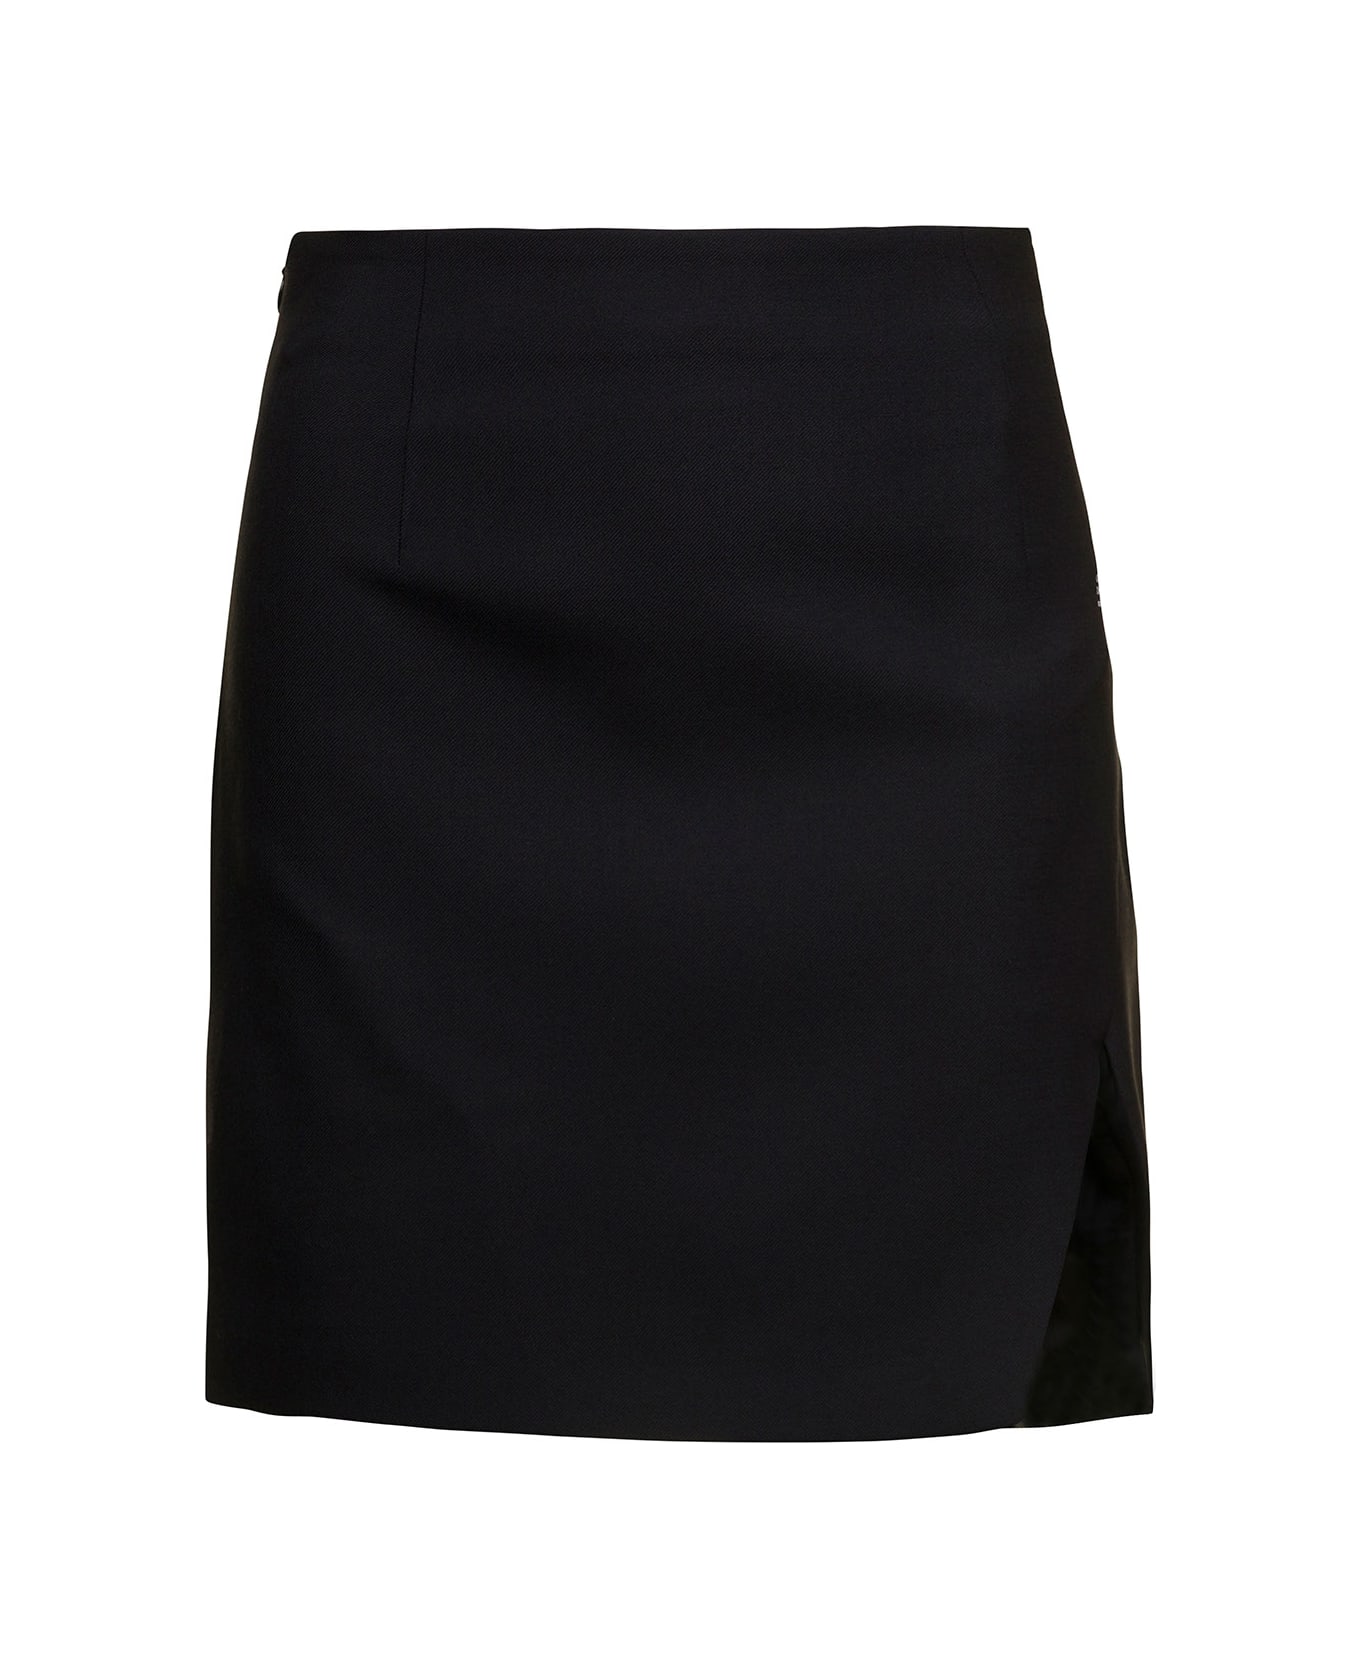 Off-White Black Mini Skirt With Split And Contrasting Logo Print In Stretch Cotton Blend Woman - Black